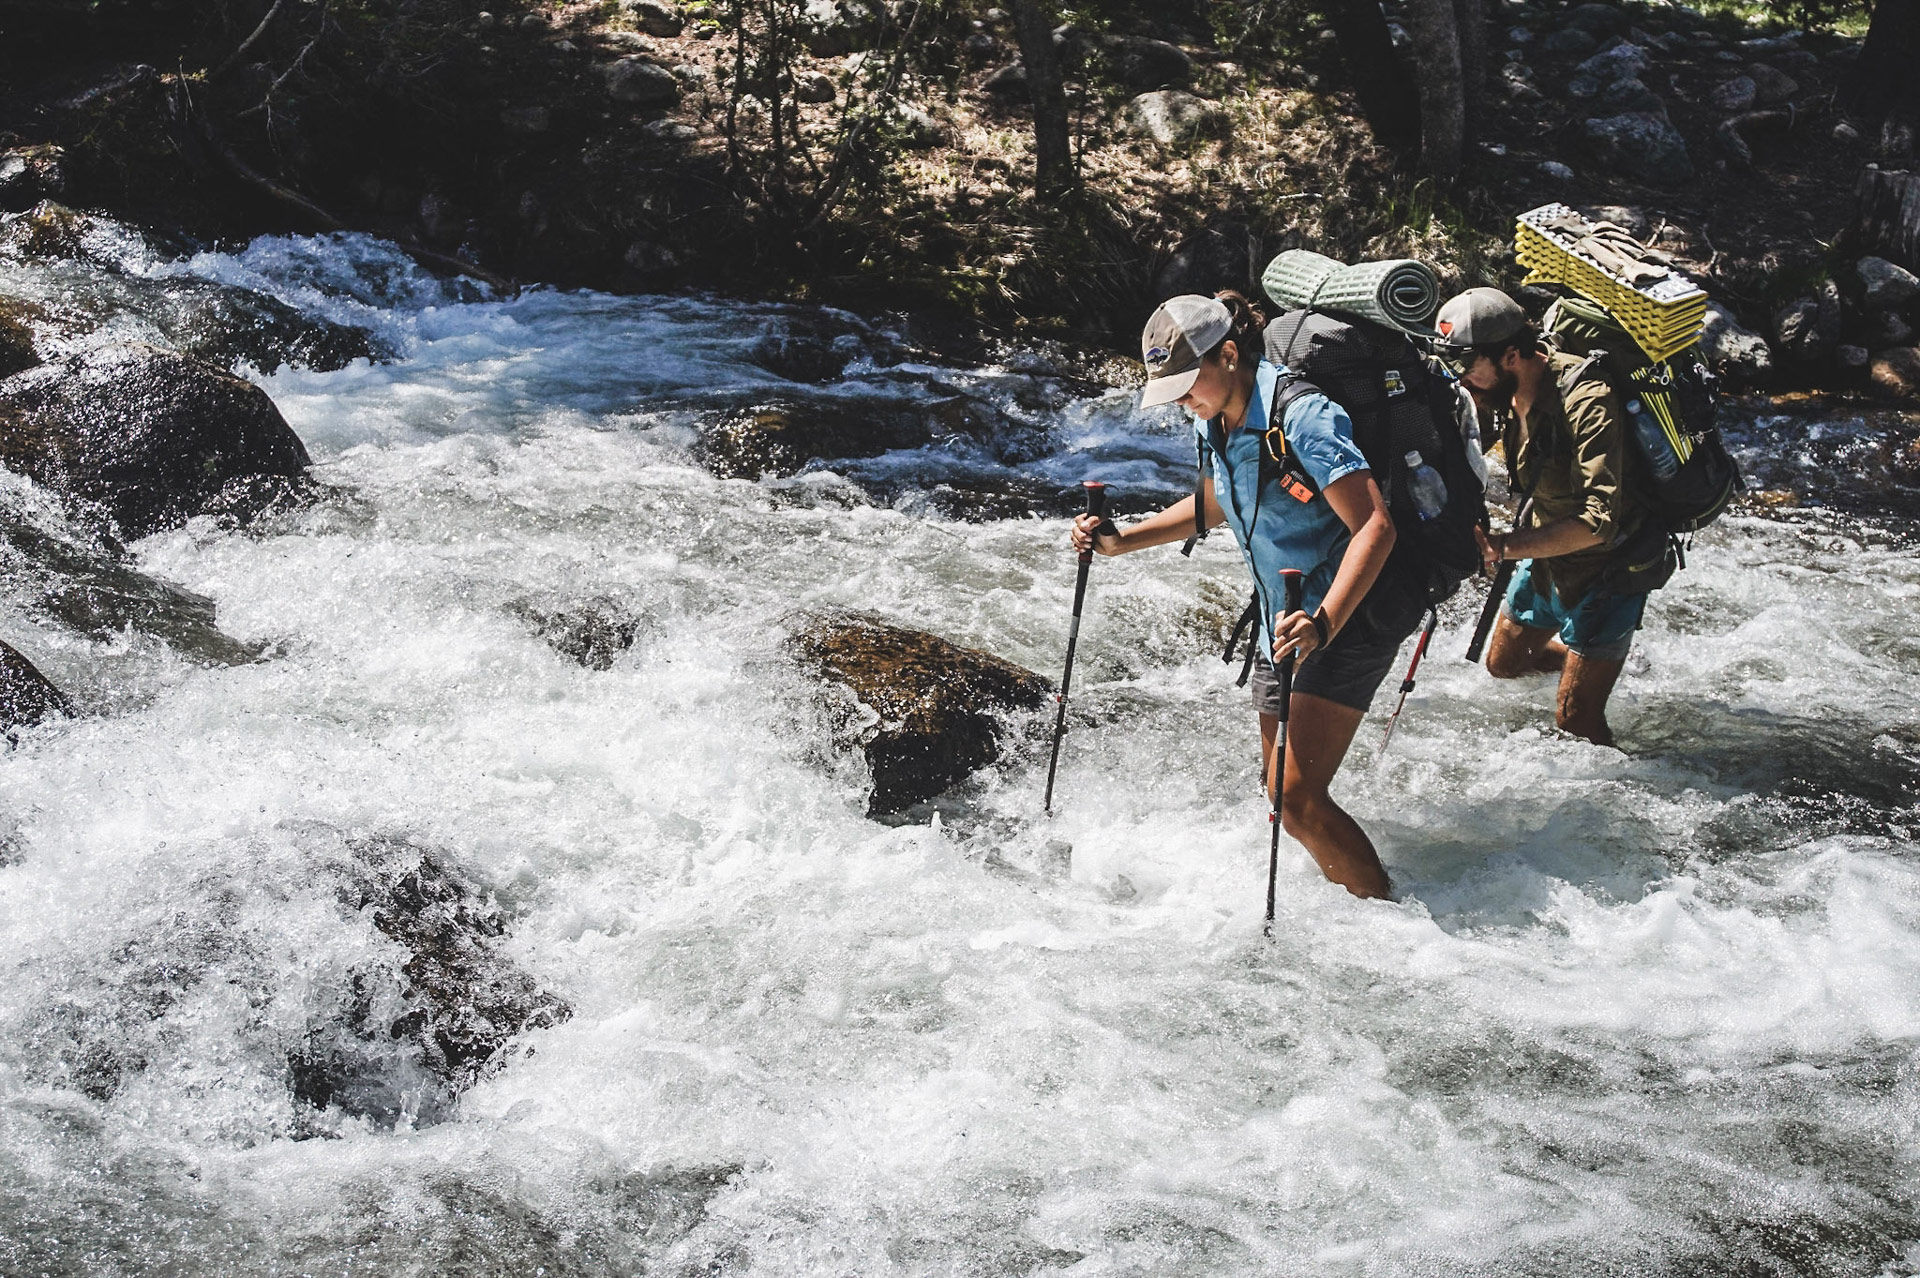 Stream crossing safety advice for hiking on the Pacific Crest Trail